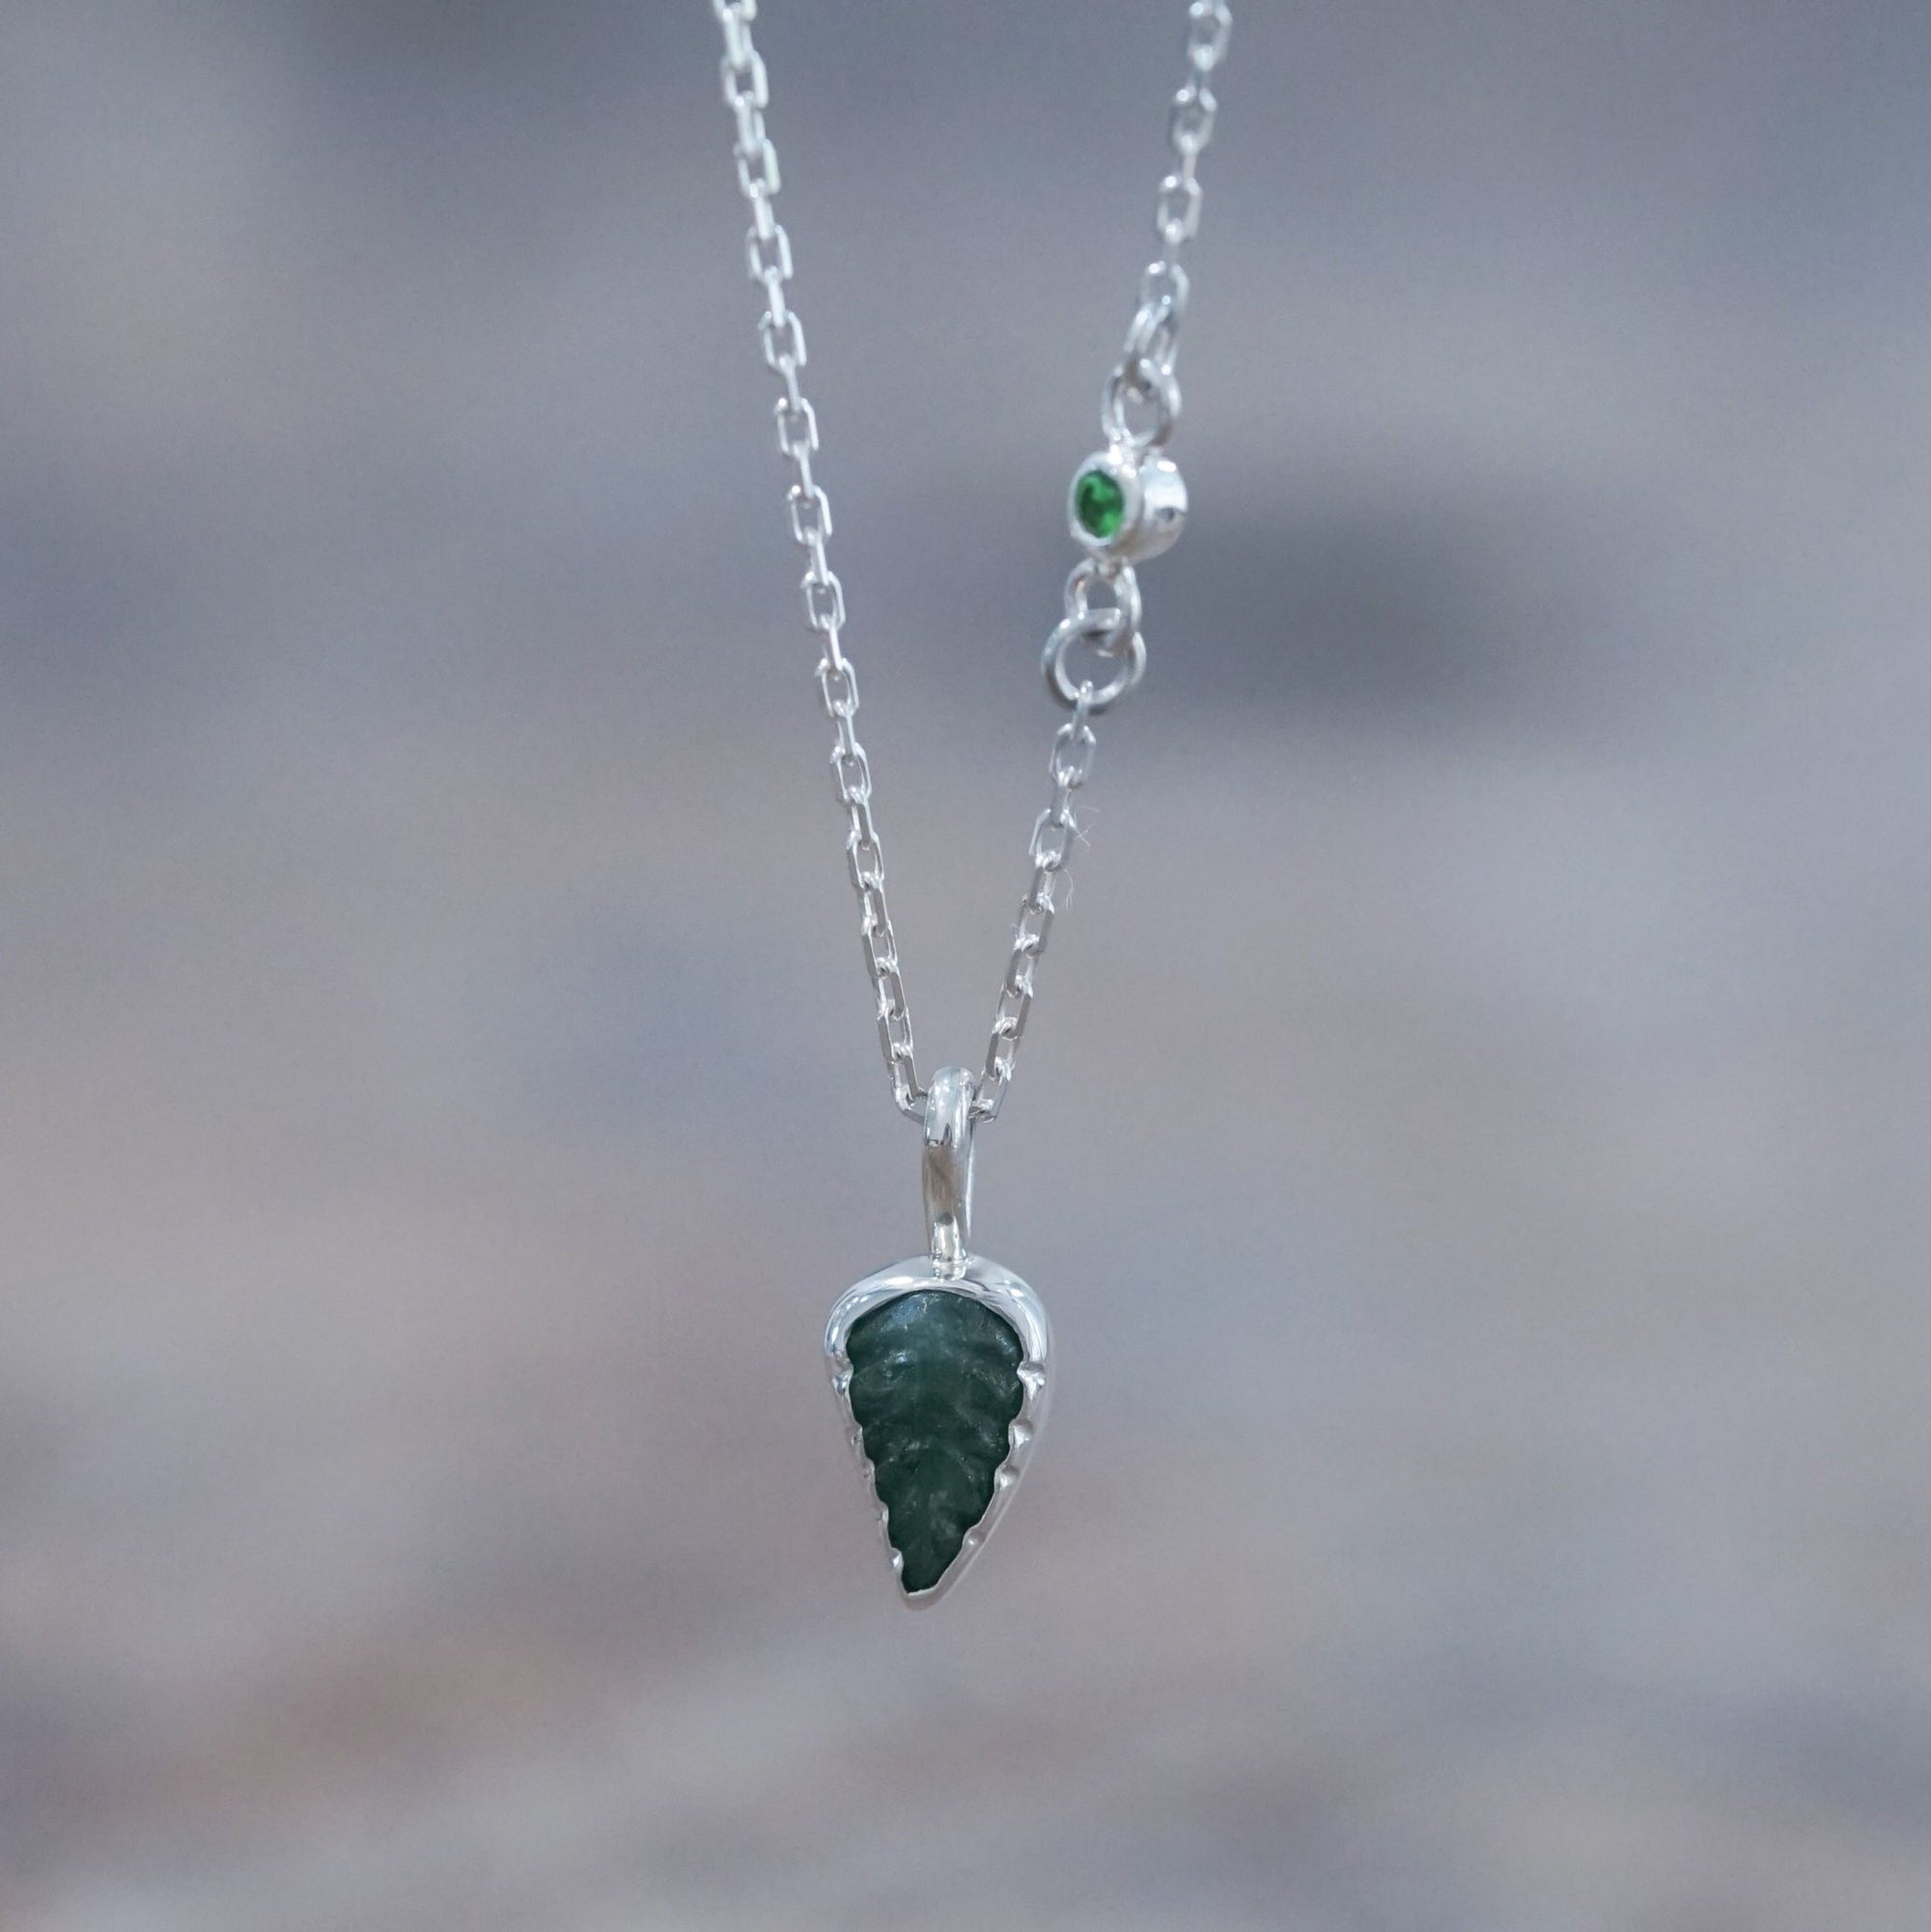 Emerald Leaf and Garnet Necklace - Gardens of the Sun | Ethical Jewelry